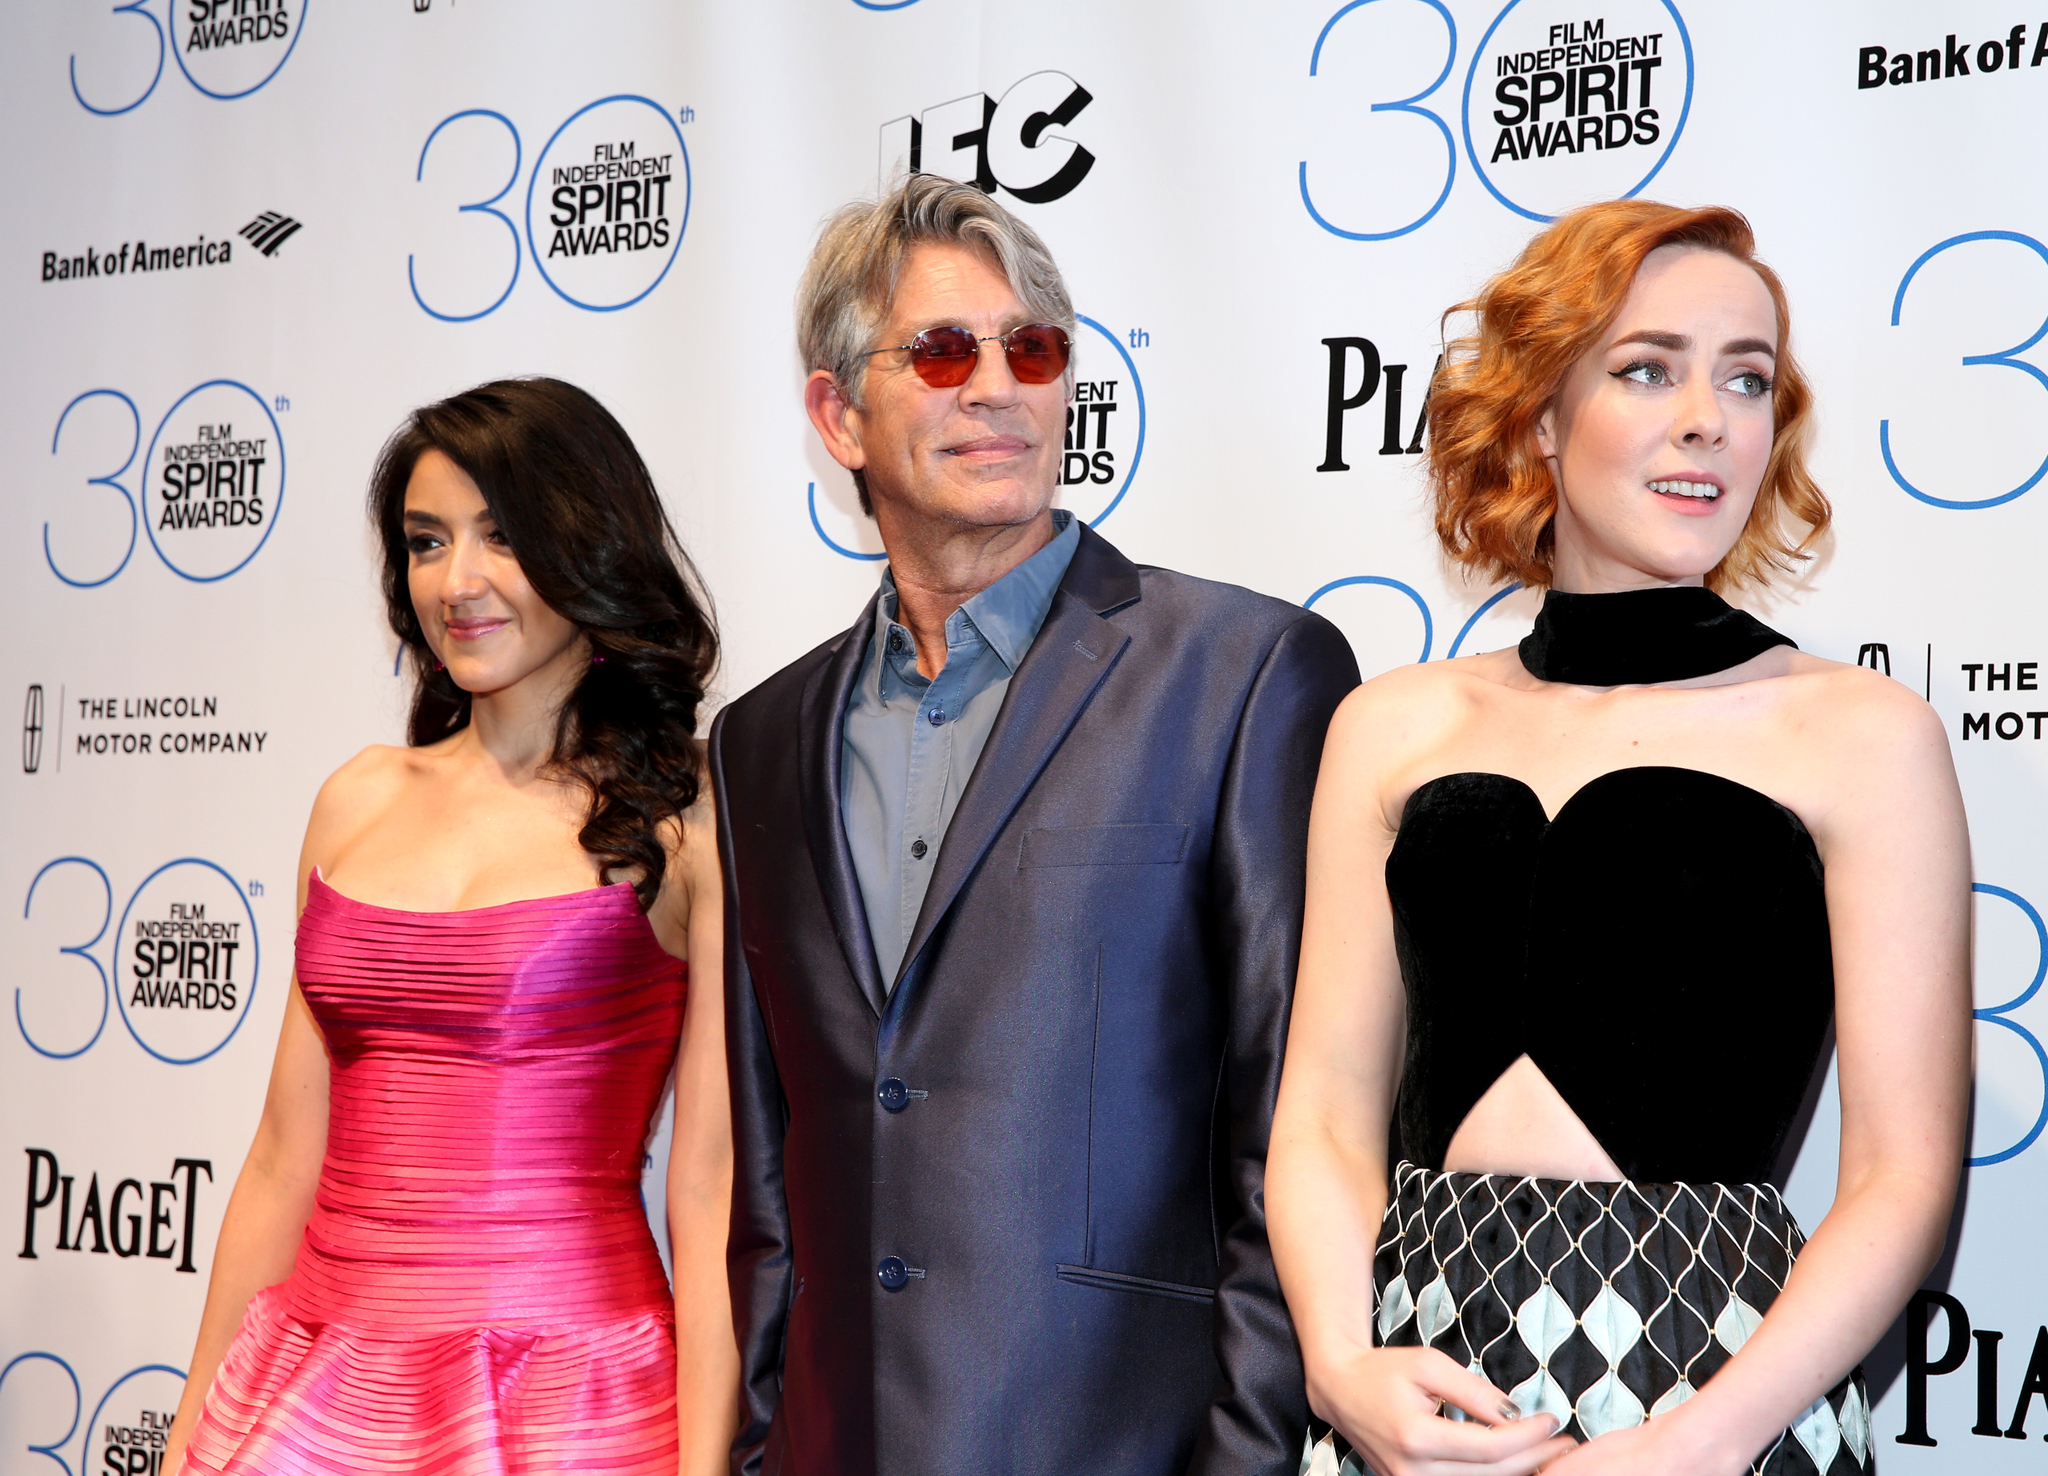 Eric Roberts, Jena Malone and Yvette Yates at event of 30th Annual Film Independent Spirit Awards (2015)